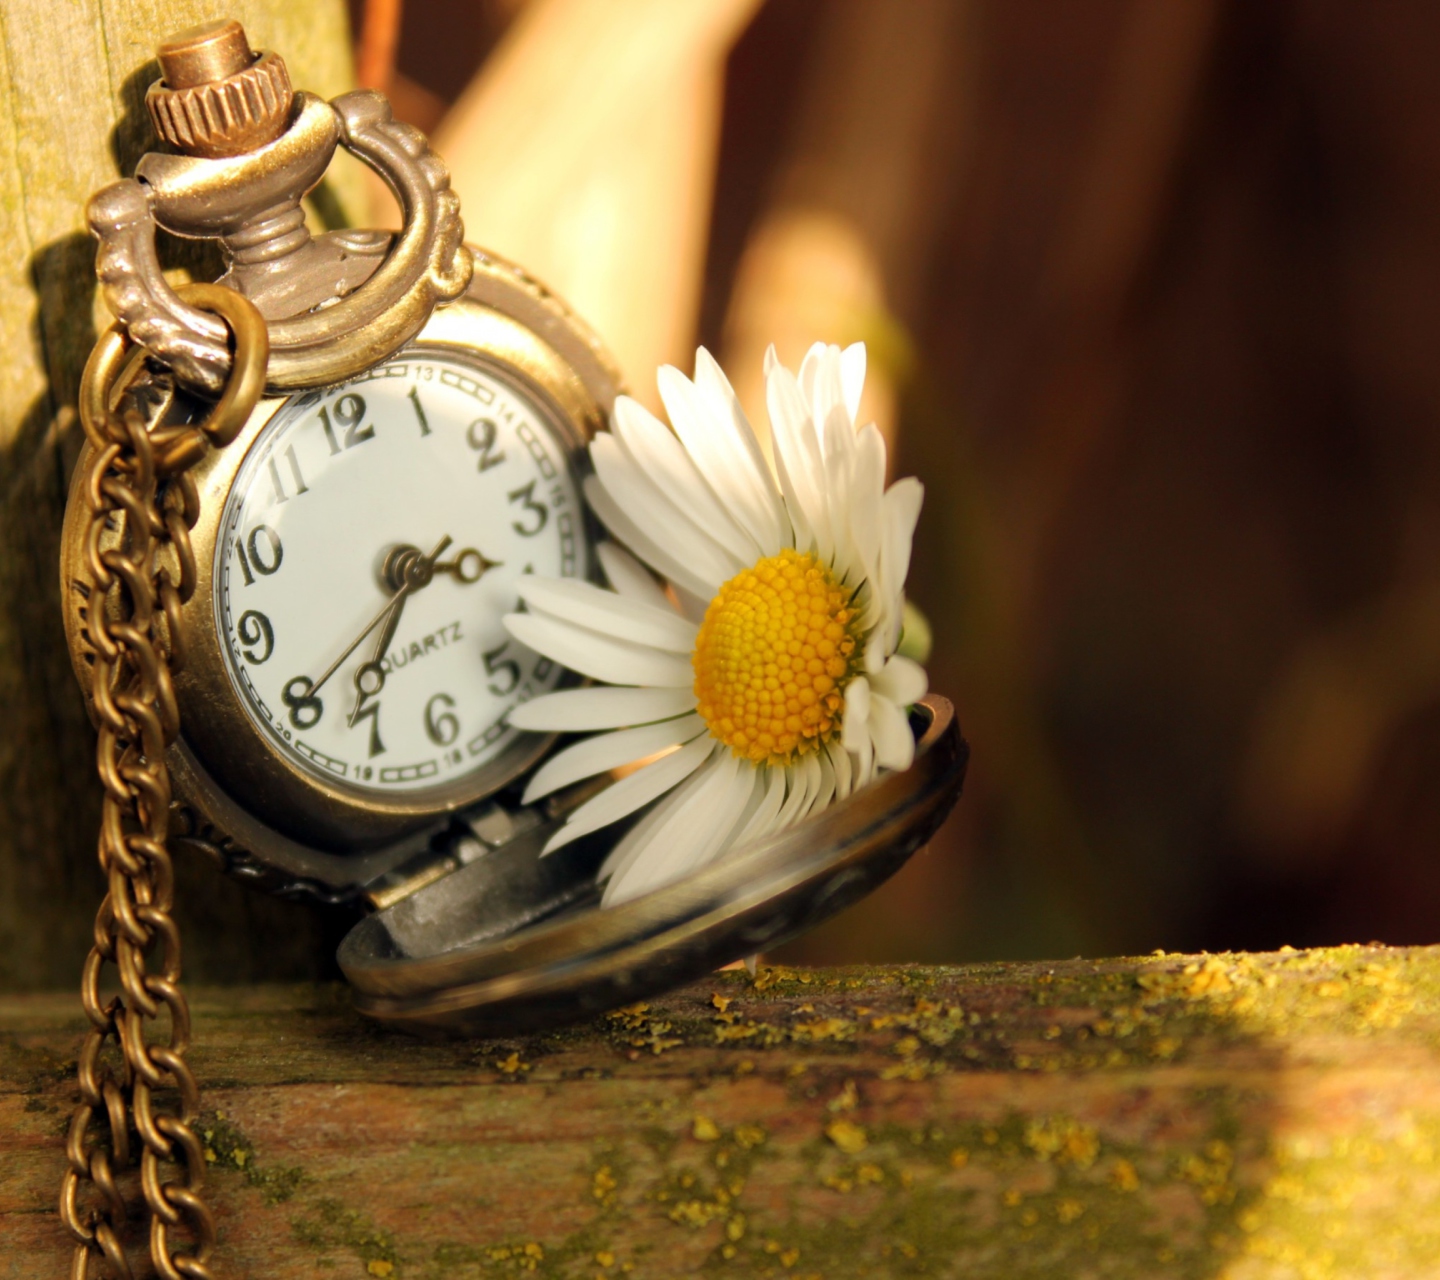 Vintage Watch And Daisy screenshot #1 1440x1280